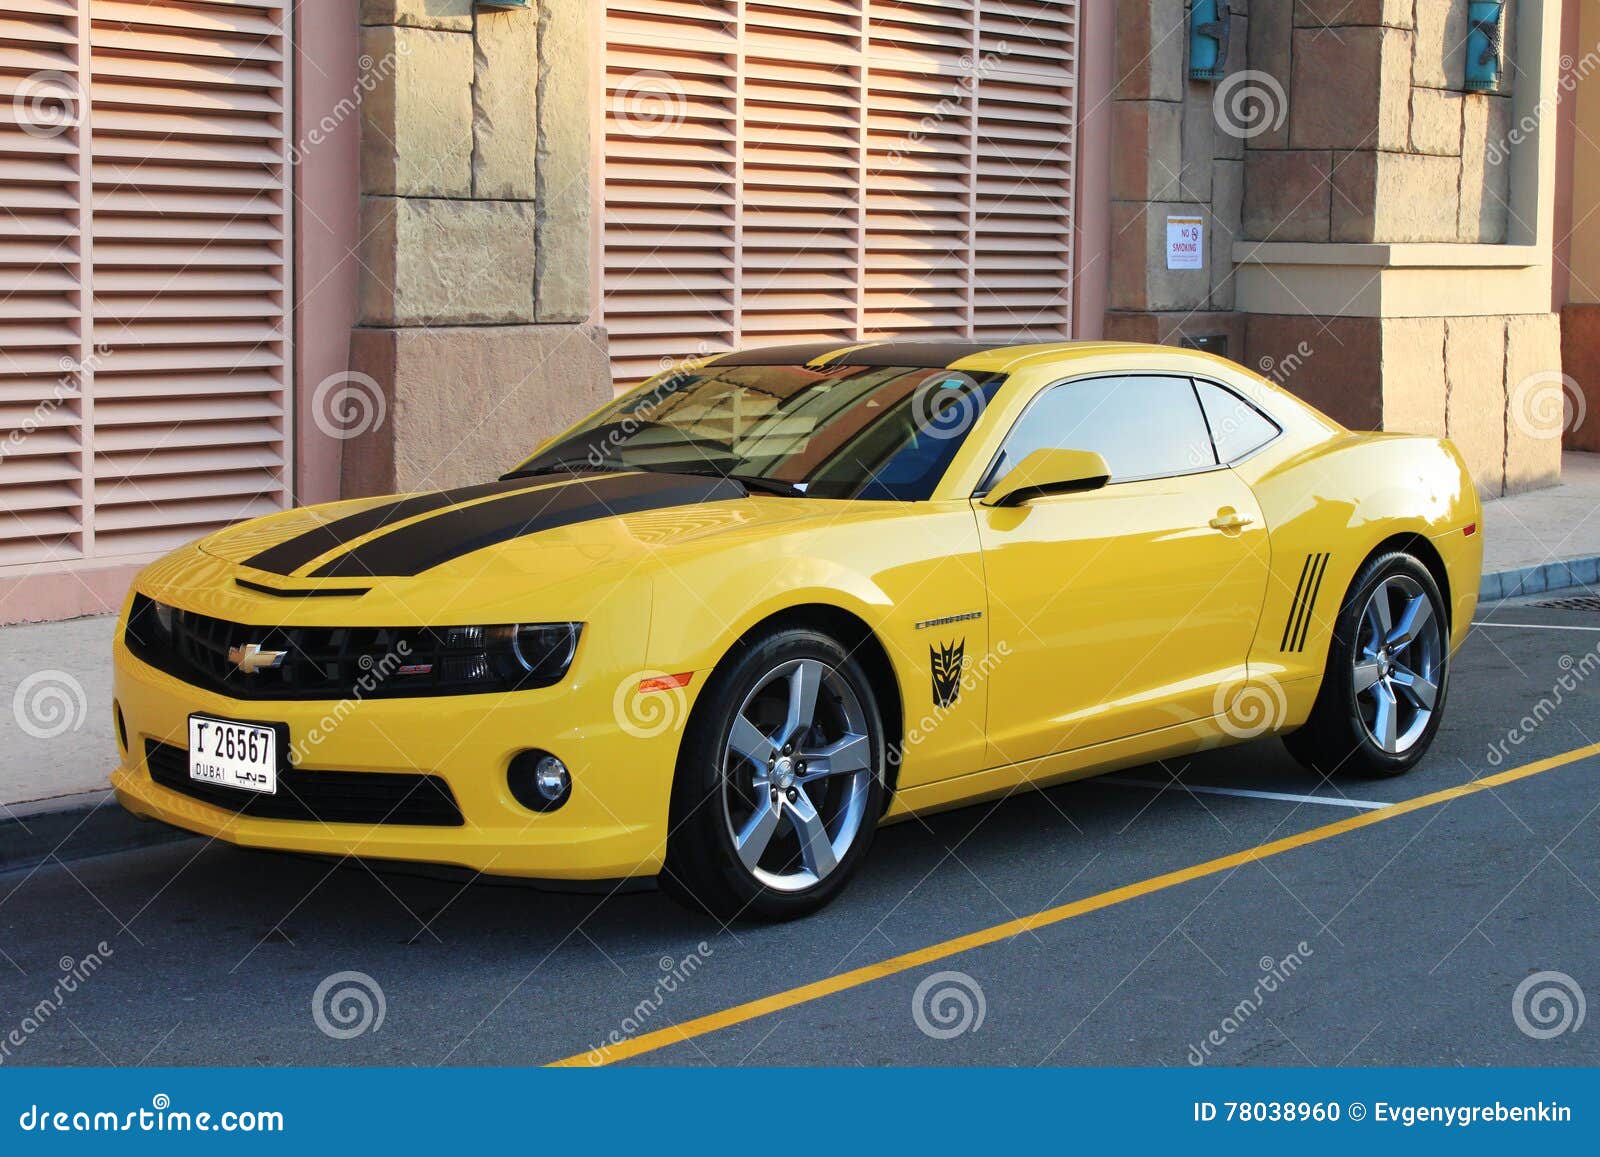 Chevrolet Camaro in Black and Yellow Editorial Image - Image of vehicle,  automobile: 78038960